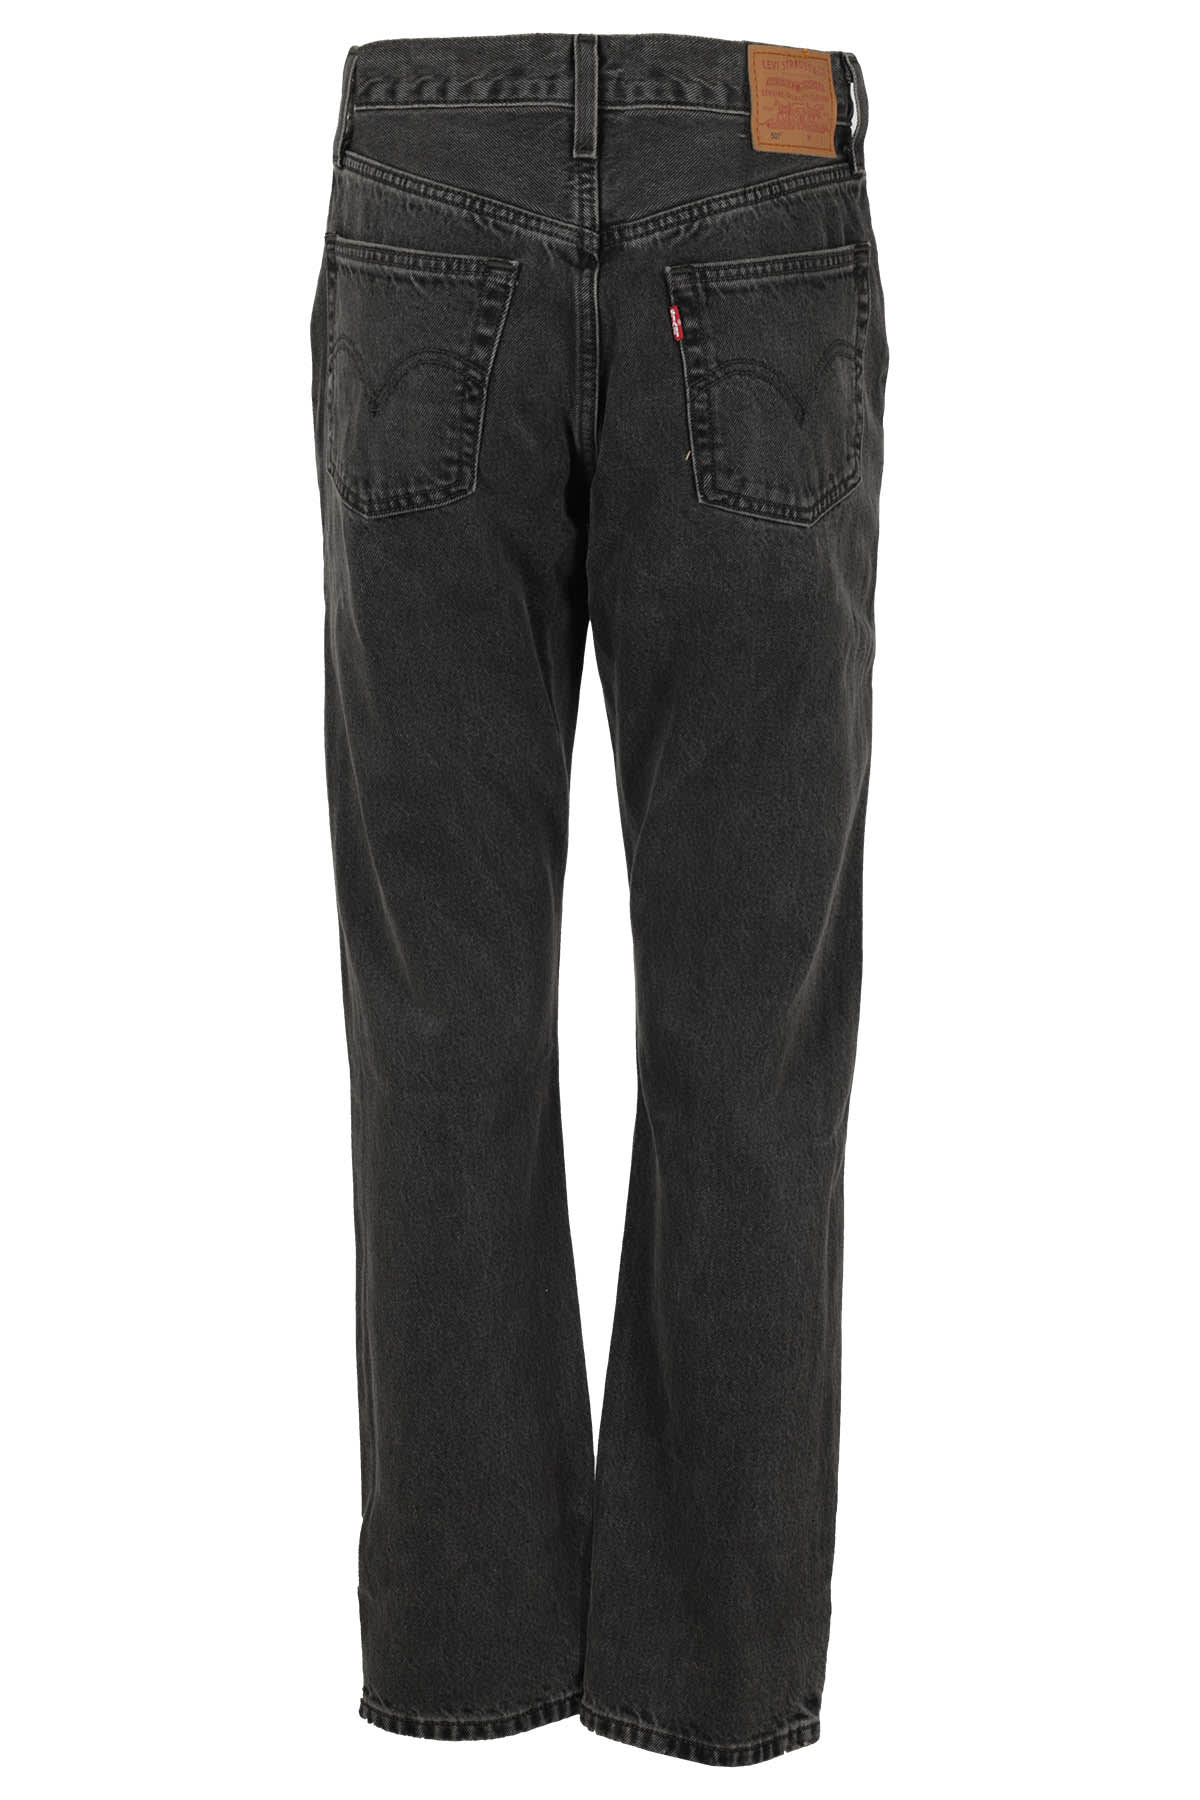 Shop Levi's 501 Jeans For Women Take A Hint In Black